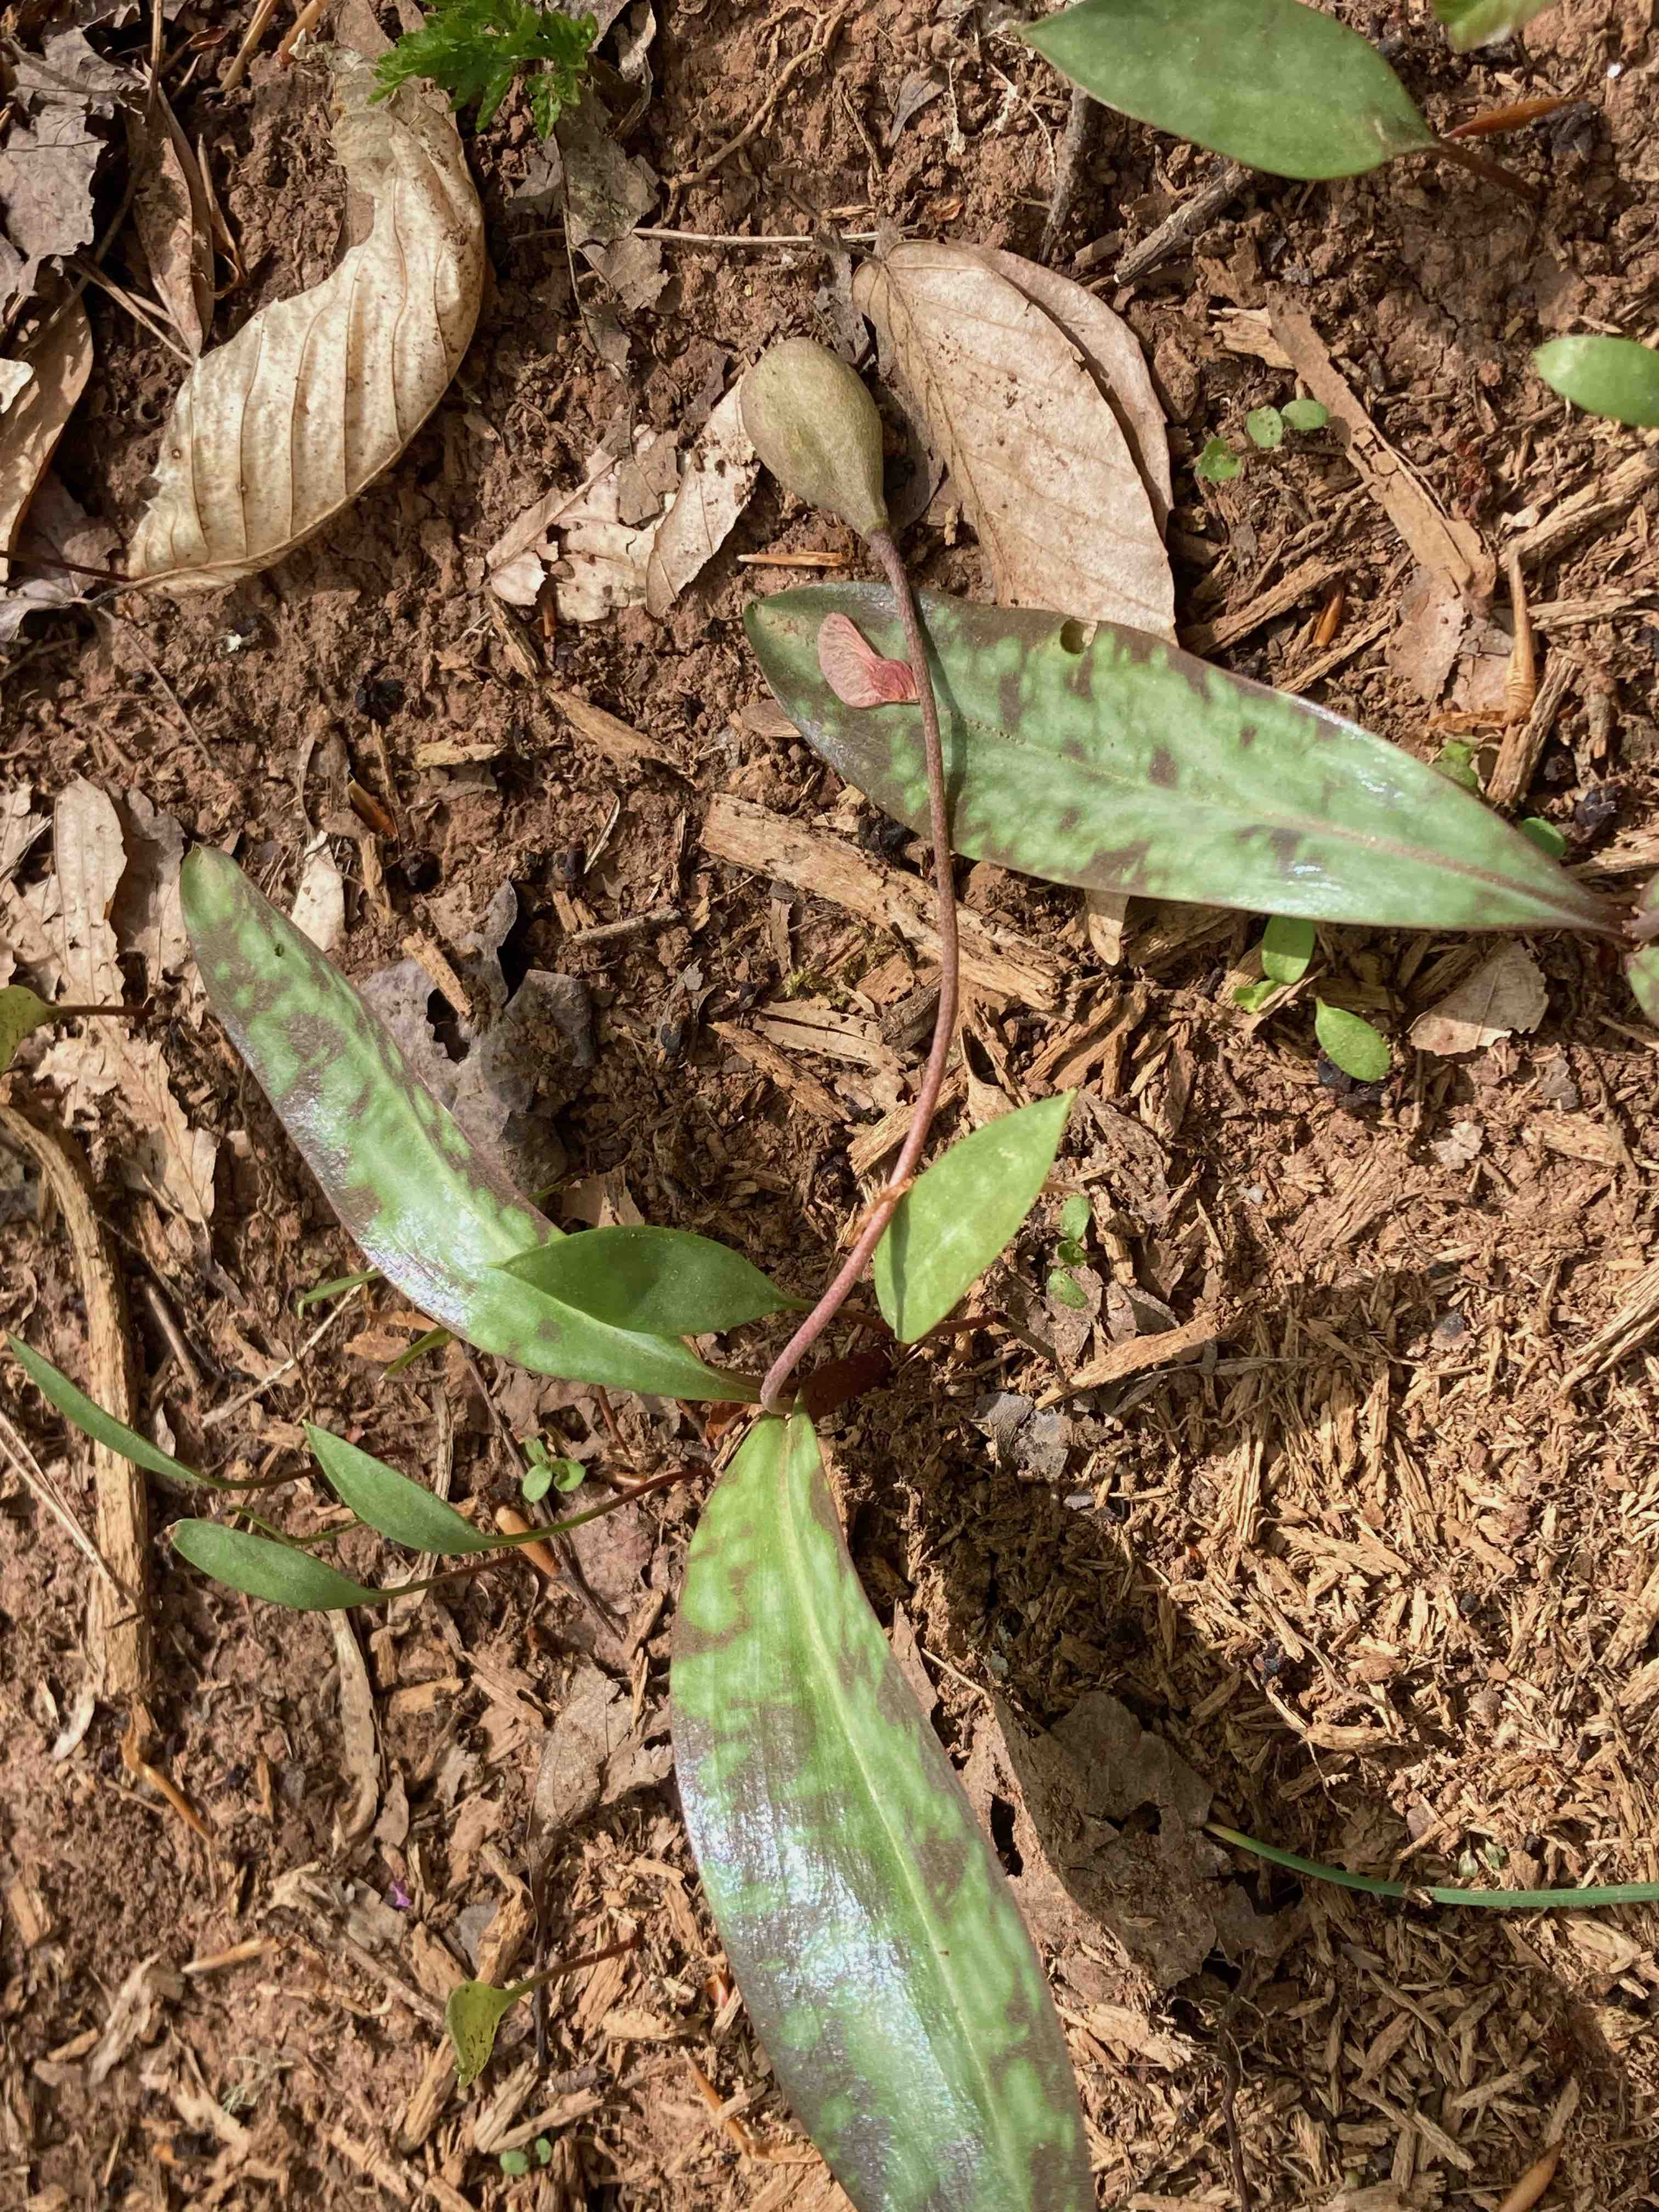 The Scientific Name is Erythronium umbilicatum [split from Erythronium americanum]. You will likely hear them called Dimpled Trout Lily, Dog-tooth Violet, Fawn Lily. This picture shows the The flower stalk with the developing capsule flops to the ground in <em>E. umbilitacum.</em>  In <em>E. americanum,</em> the flower stalk with capsule remains upright. of Erythronium umbilicatum [split from Erythronium americanum]